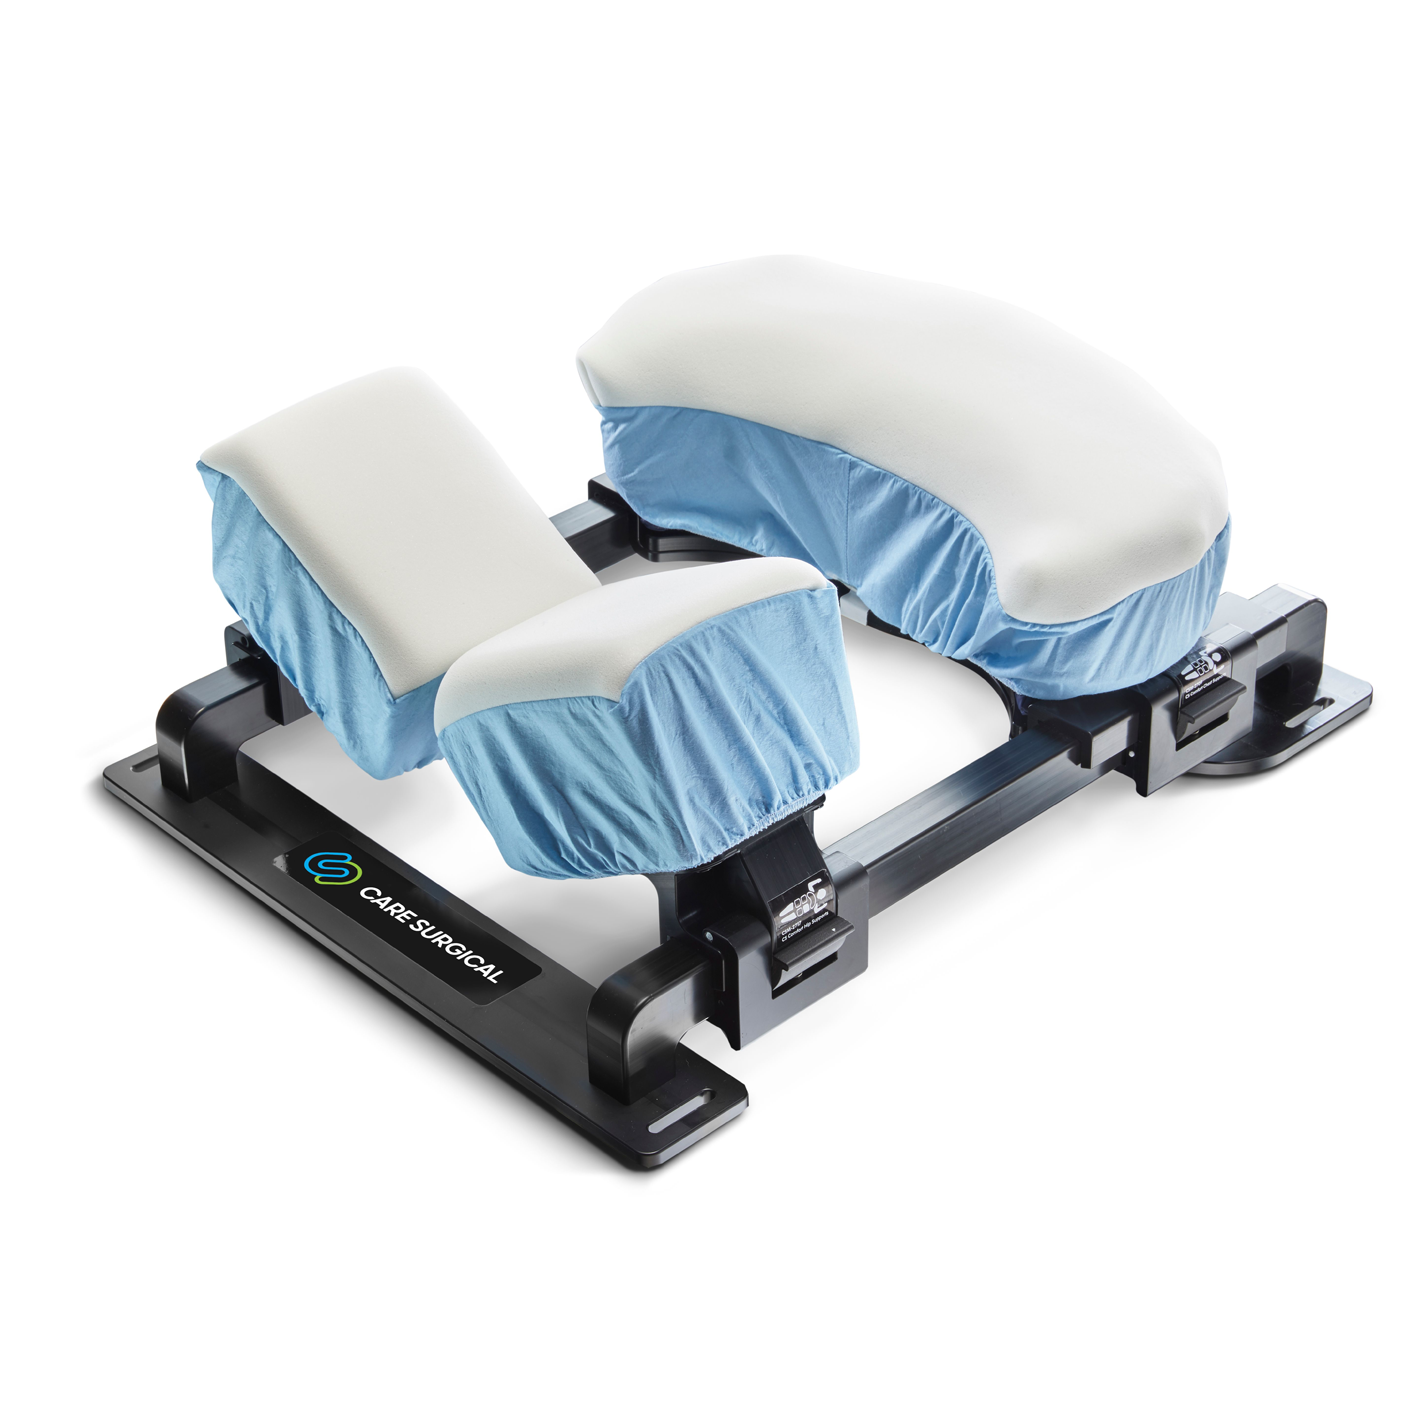 spine frame patient positioning equipment with comfort covers